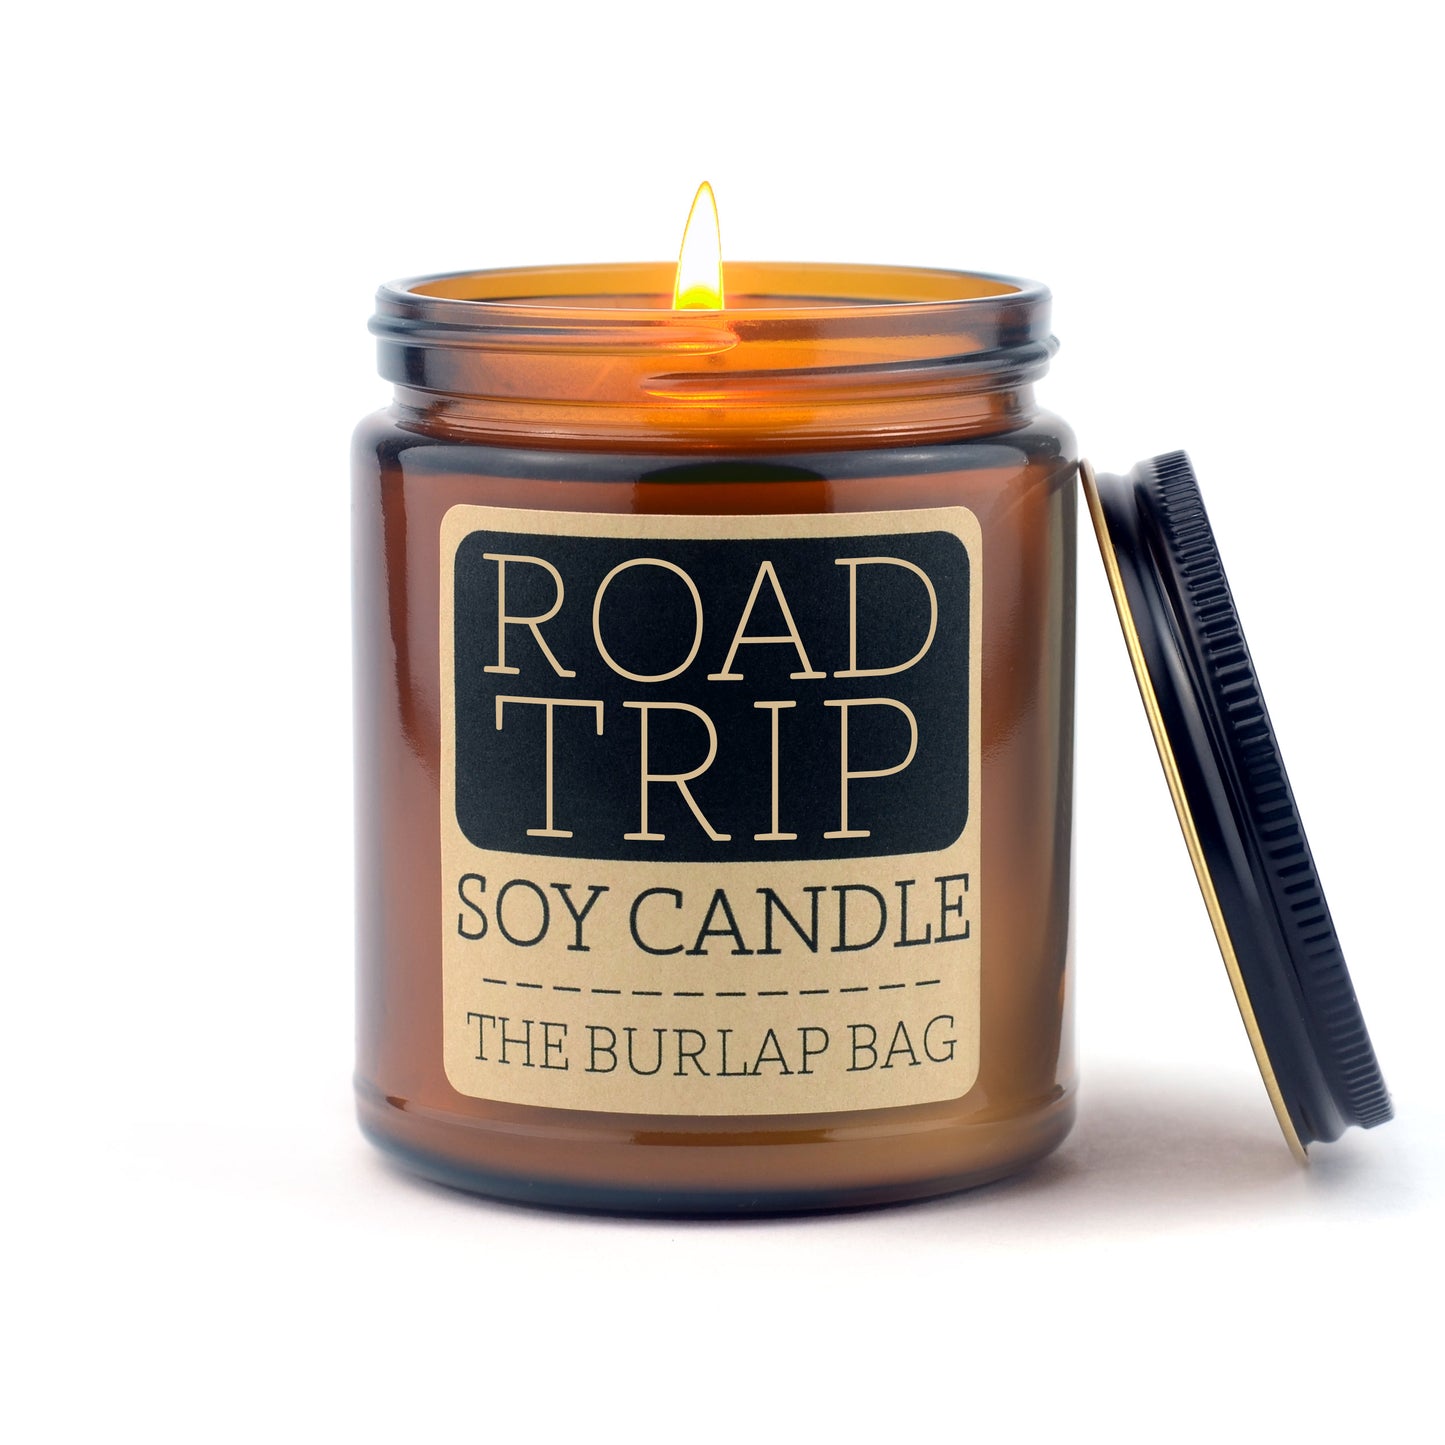 Road Trip - Soy Candle 9oz